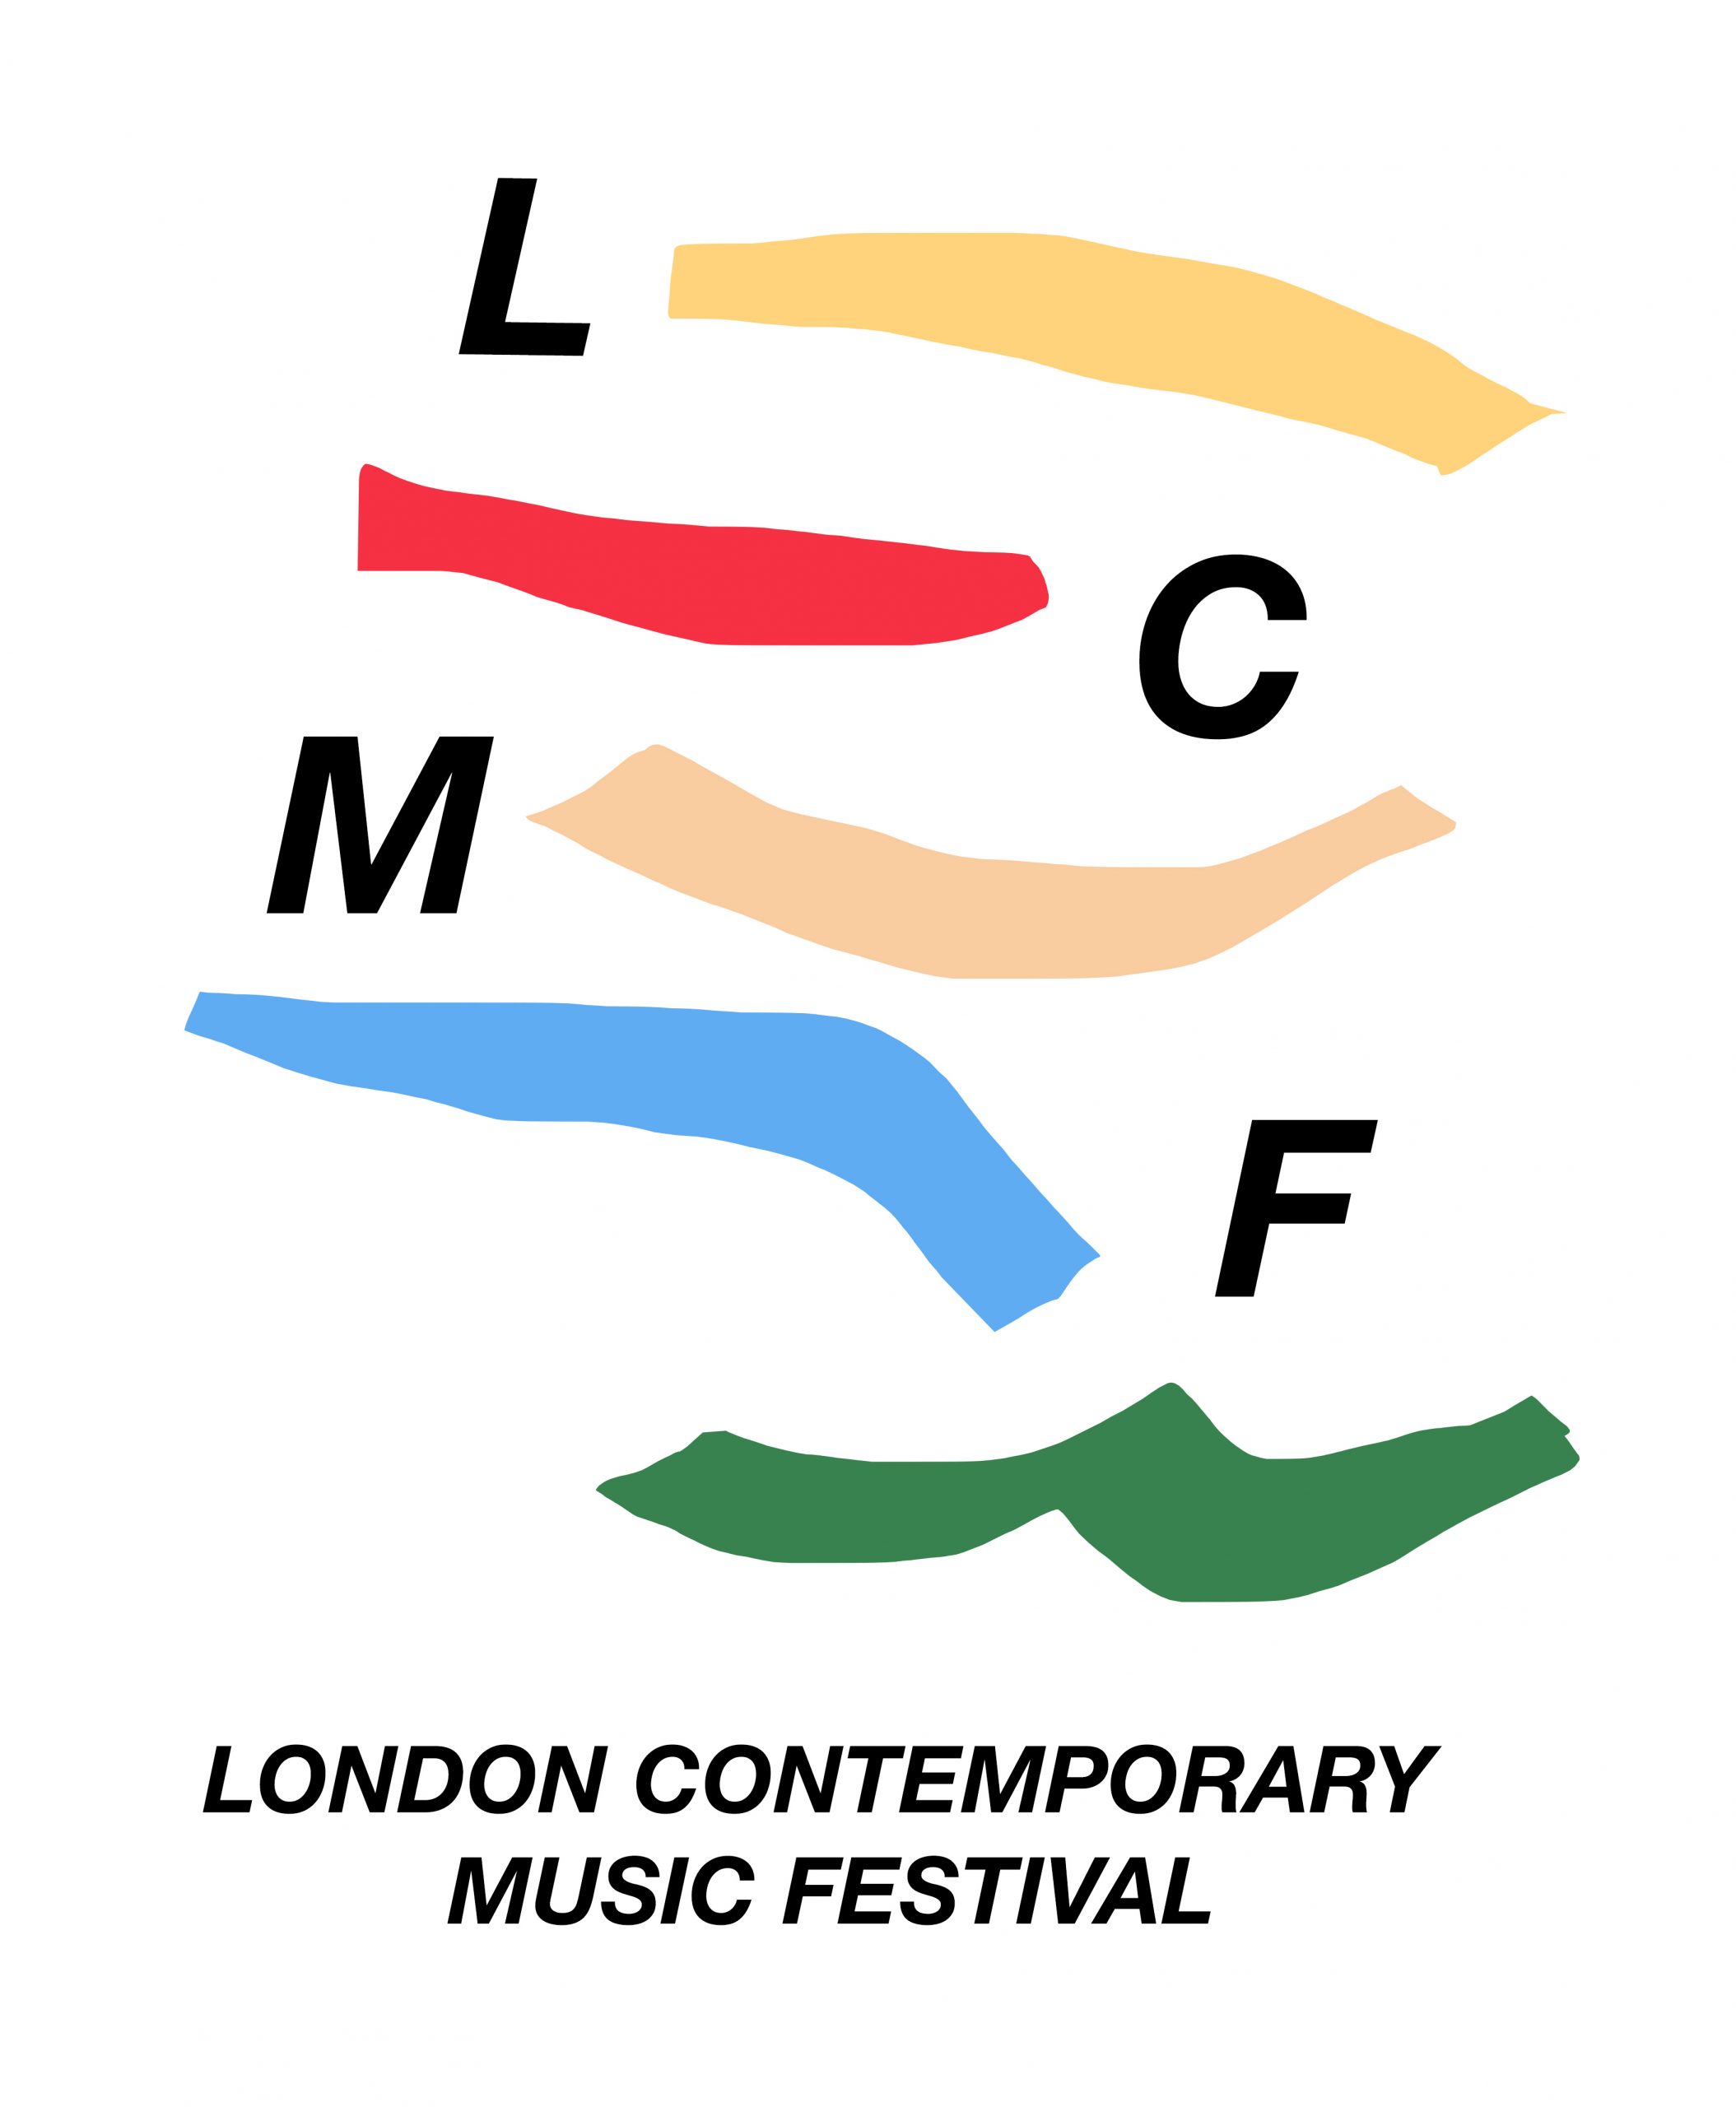 London Contemporary Music Festival: The Open Fund for Organisations